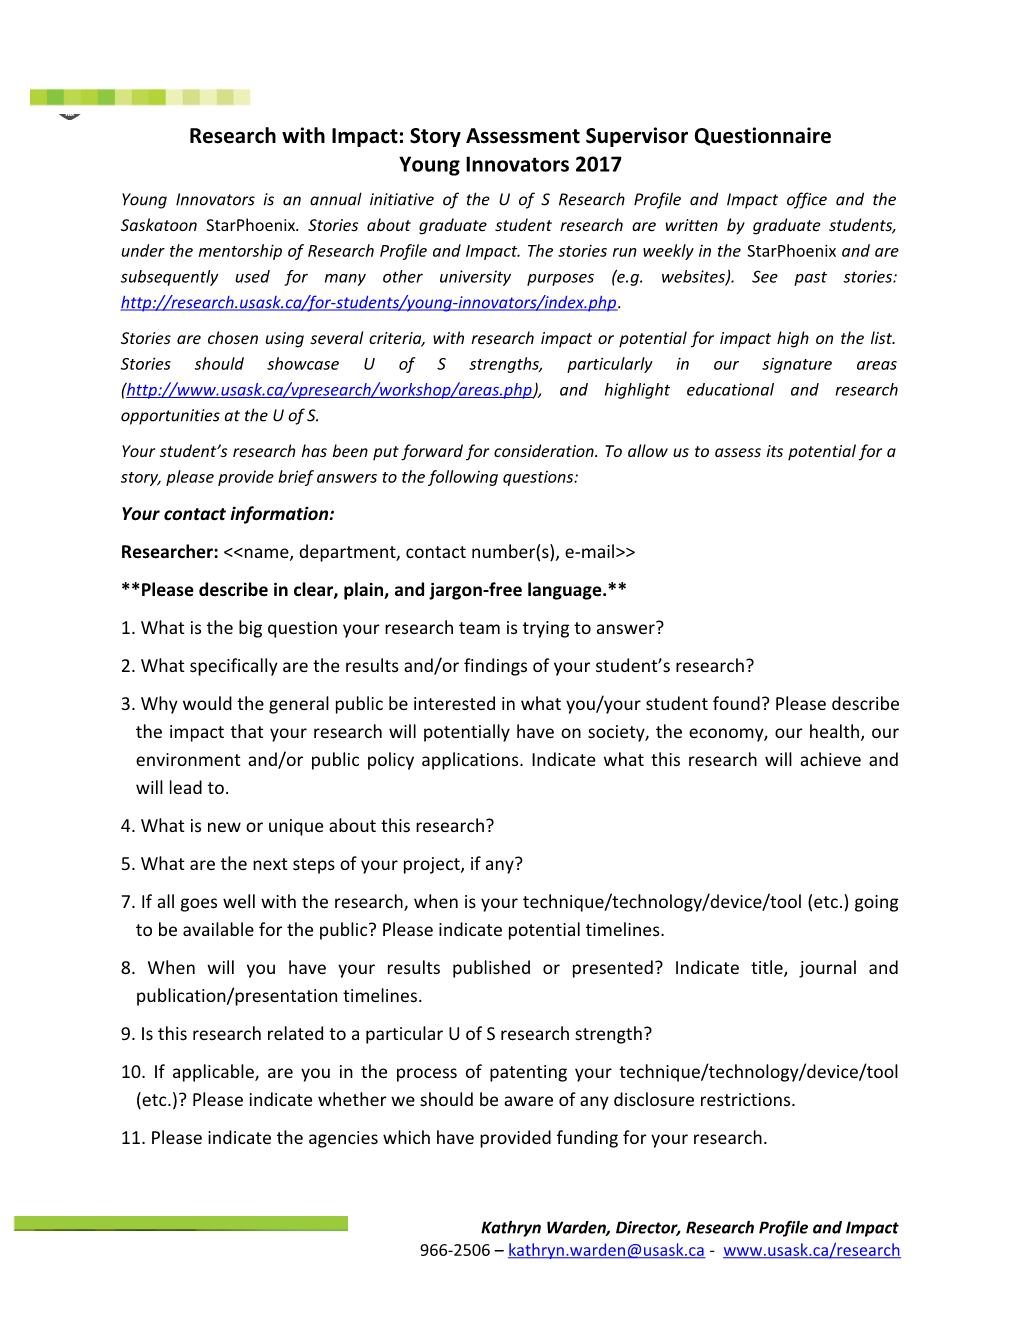 Research with Impact: Story Assessment Supervisor Questionnaire